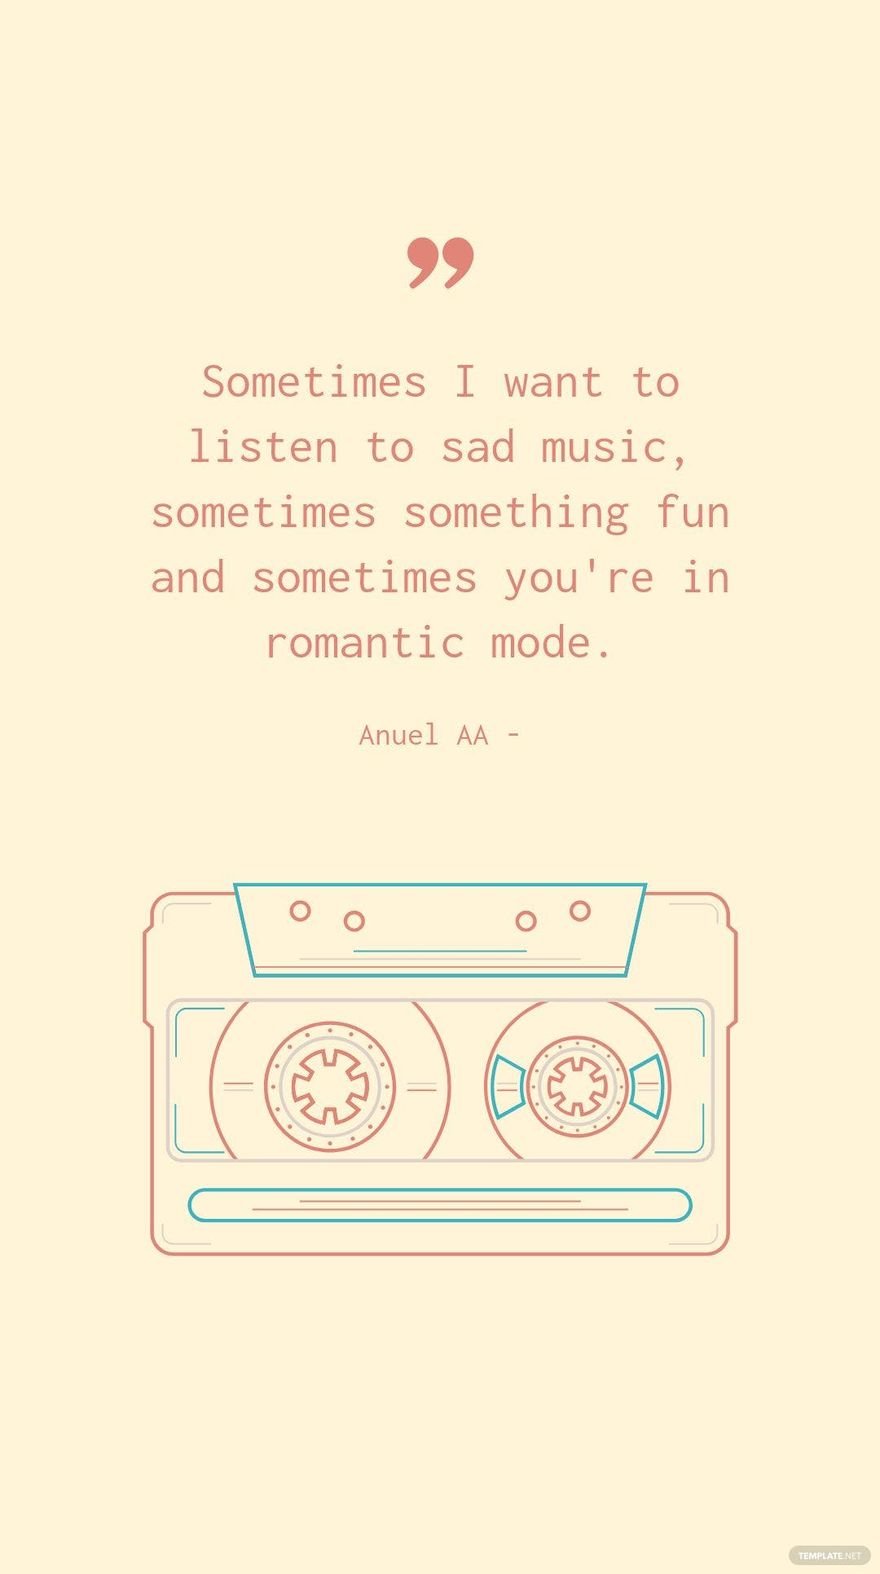 Anuel AA - Sometimes I want to listen to sad music, sometimes something fun and sometimes you're in romantic mode.